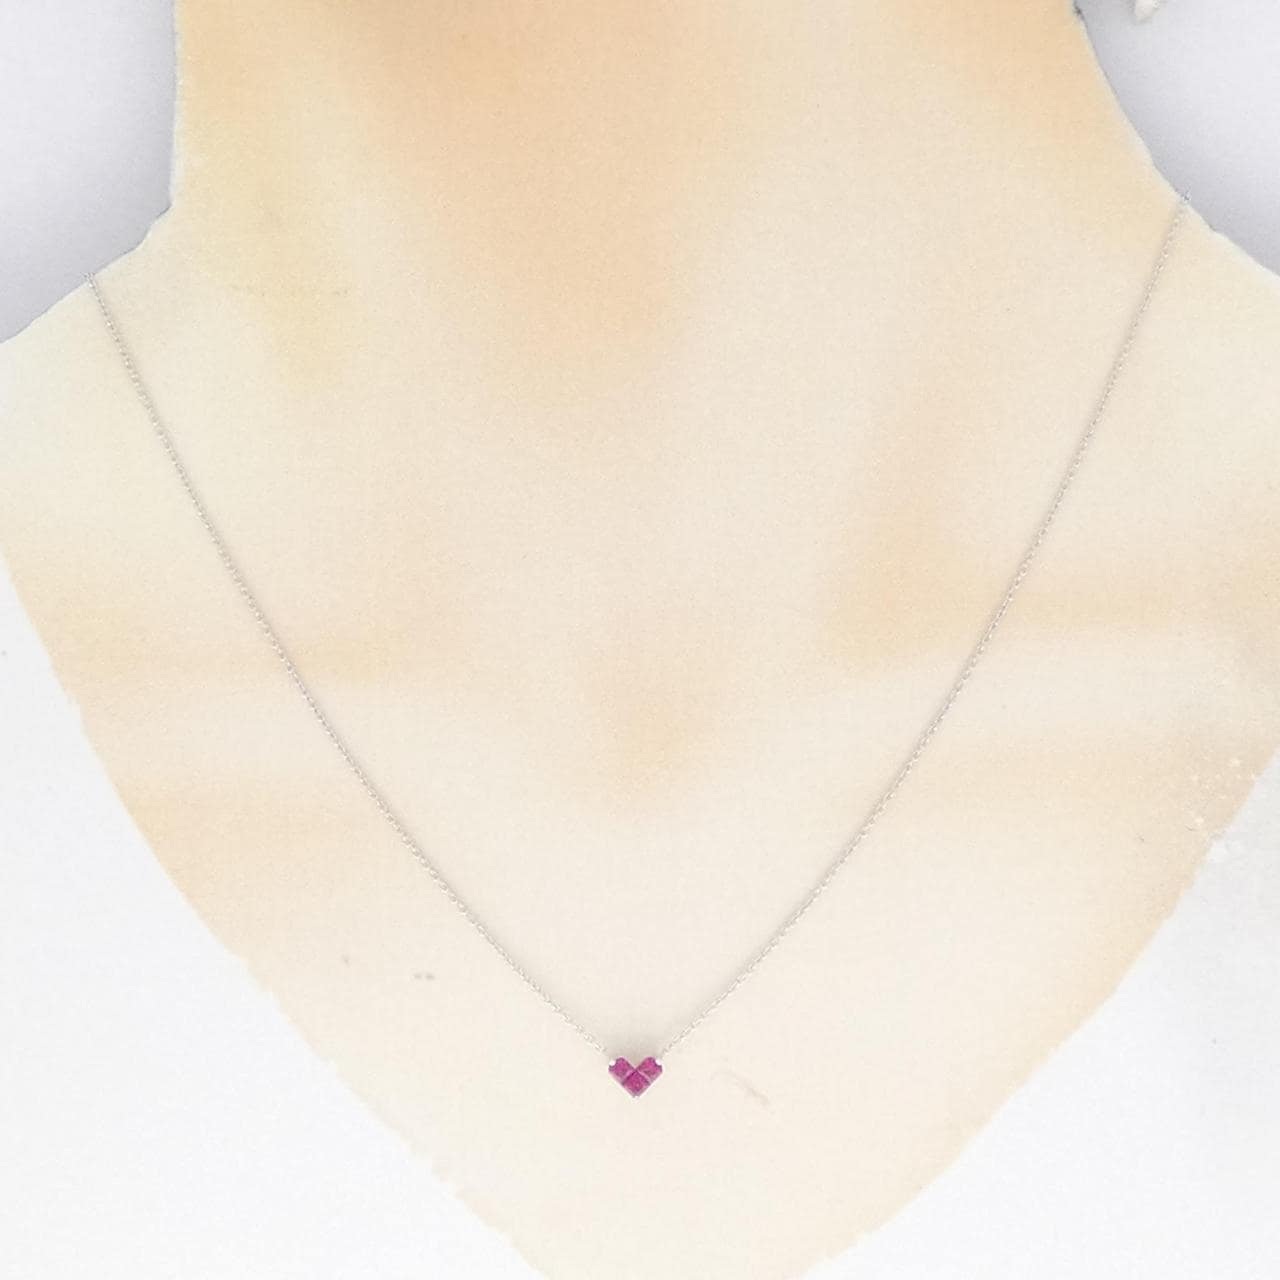 STAR JEWELRY Mysterious Heart Necklace 0.25CT